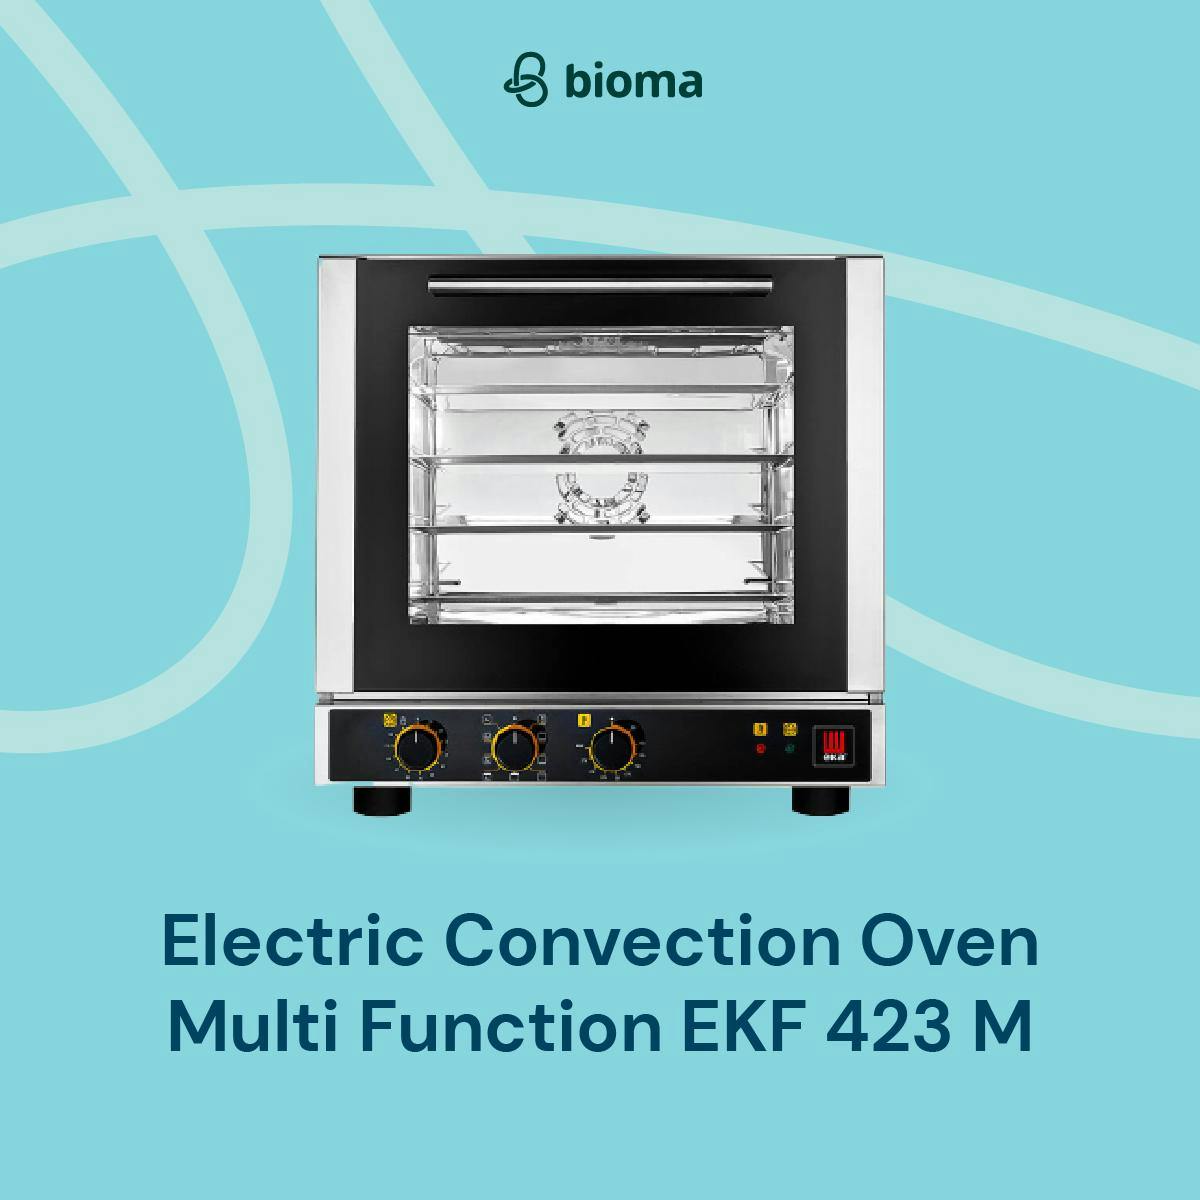 Image 50247 Electric Convection Oven Multi Function EKF 423 M